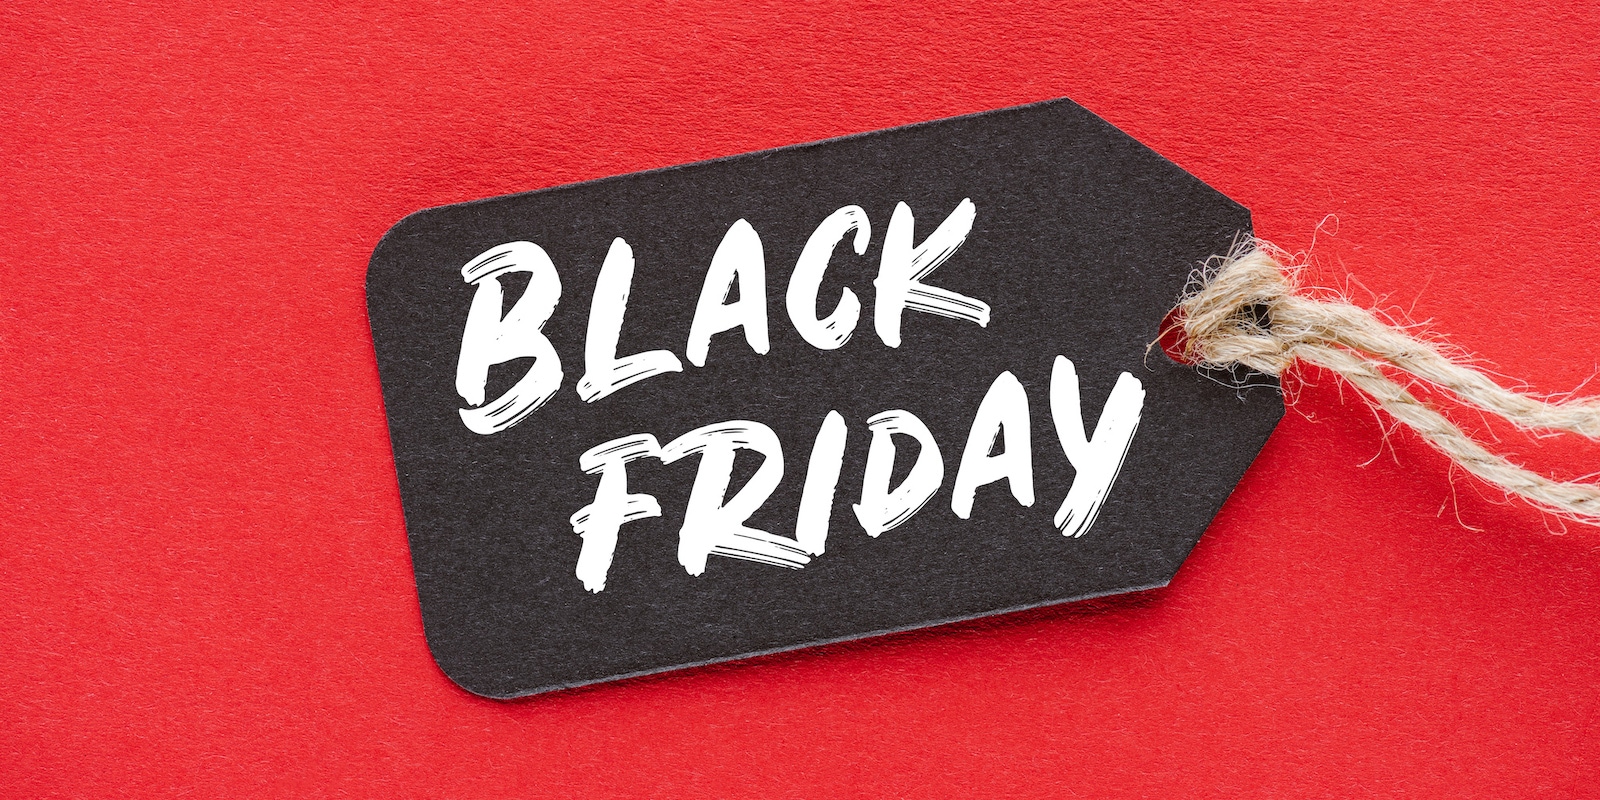 Jump on these early Black Friday deals, perfect for any iPhone fan.